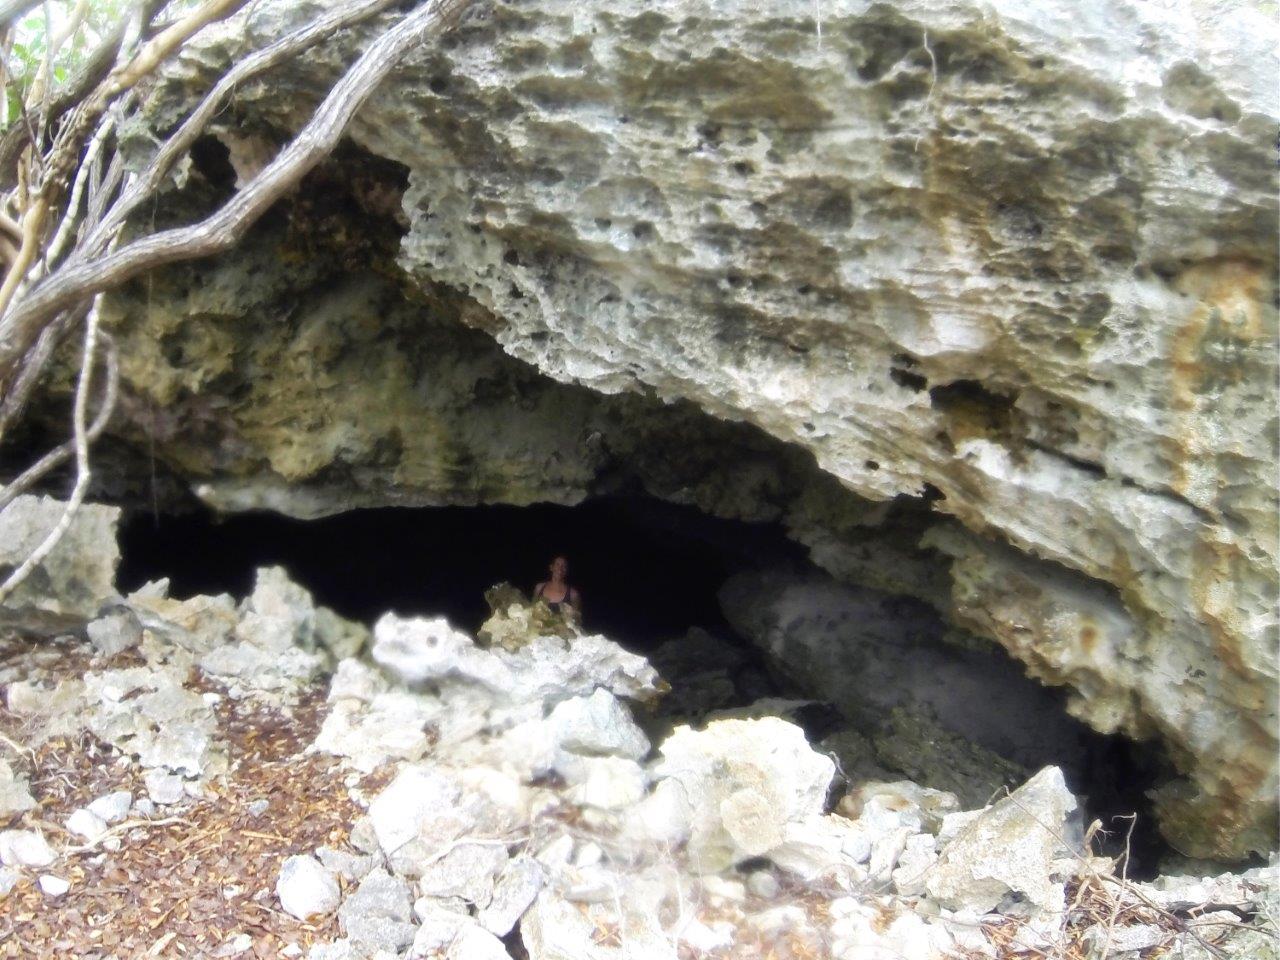 Cave entrance from outside